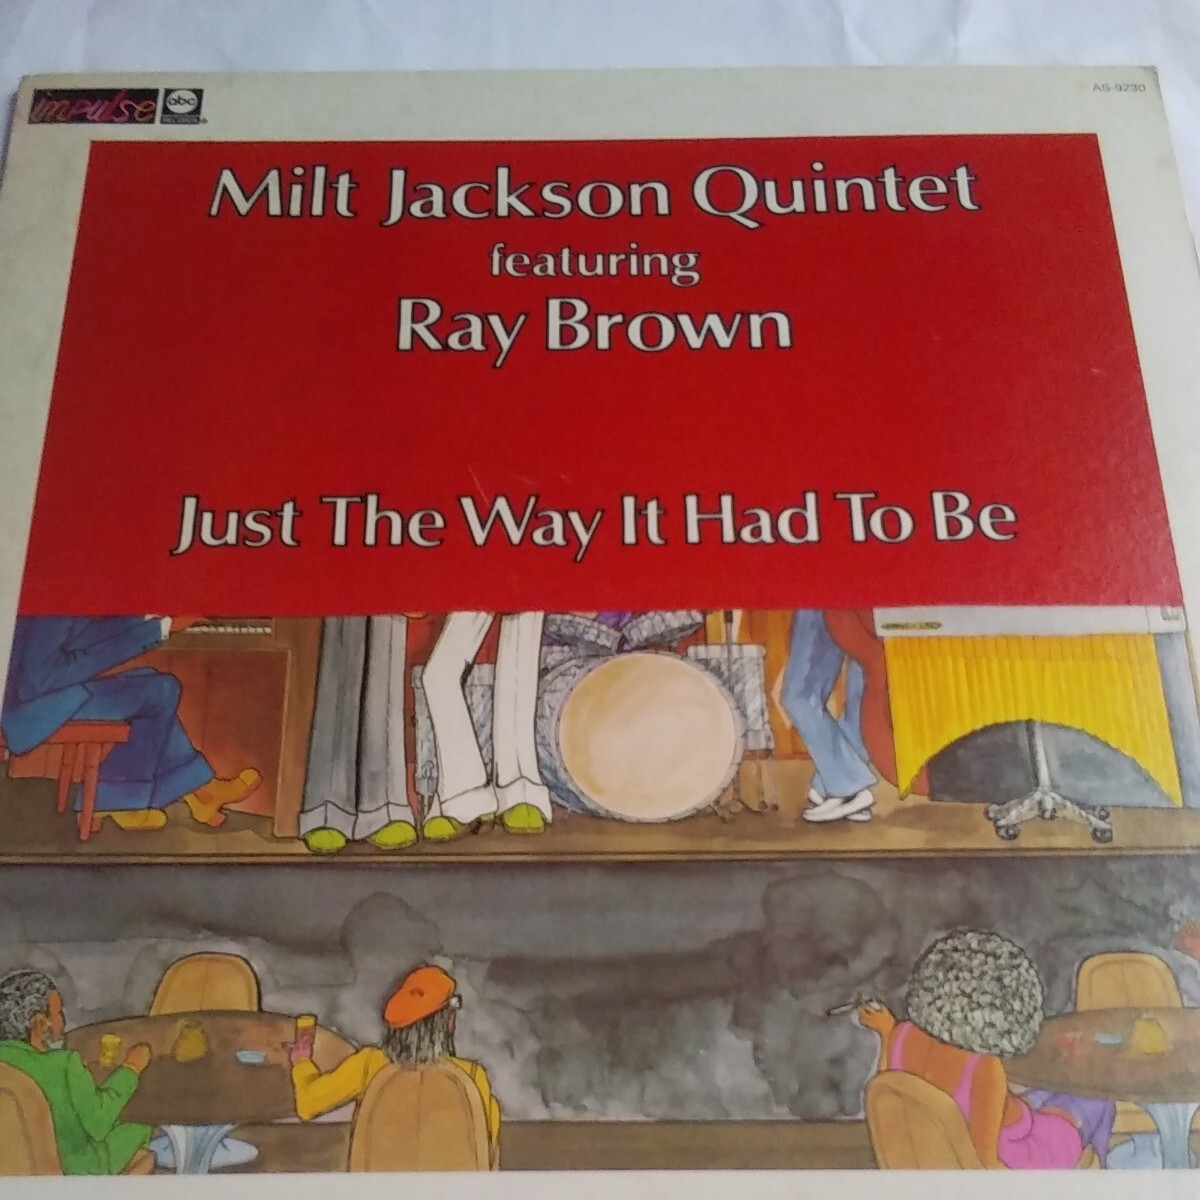 Milt Jackson Quintet featuring Ray Brown Just The Way It Had To Be impulse abc records AS-9230 Printed in usa_画像1